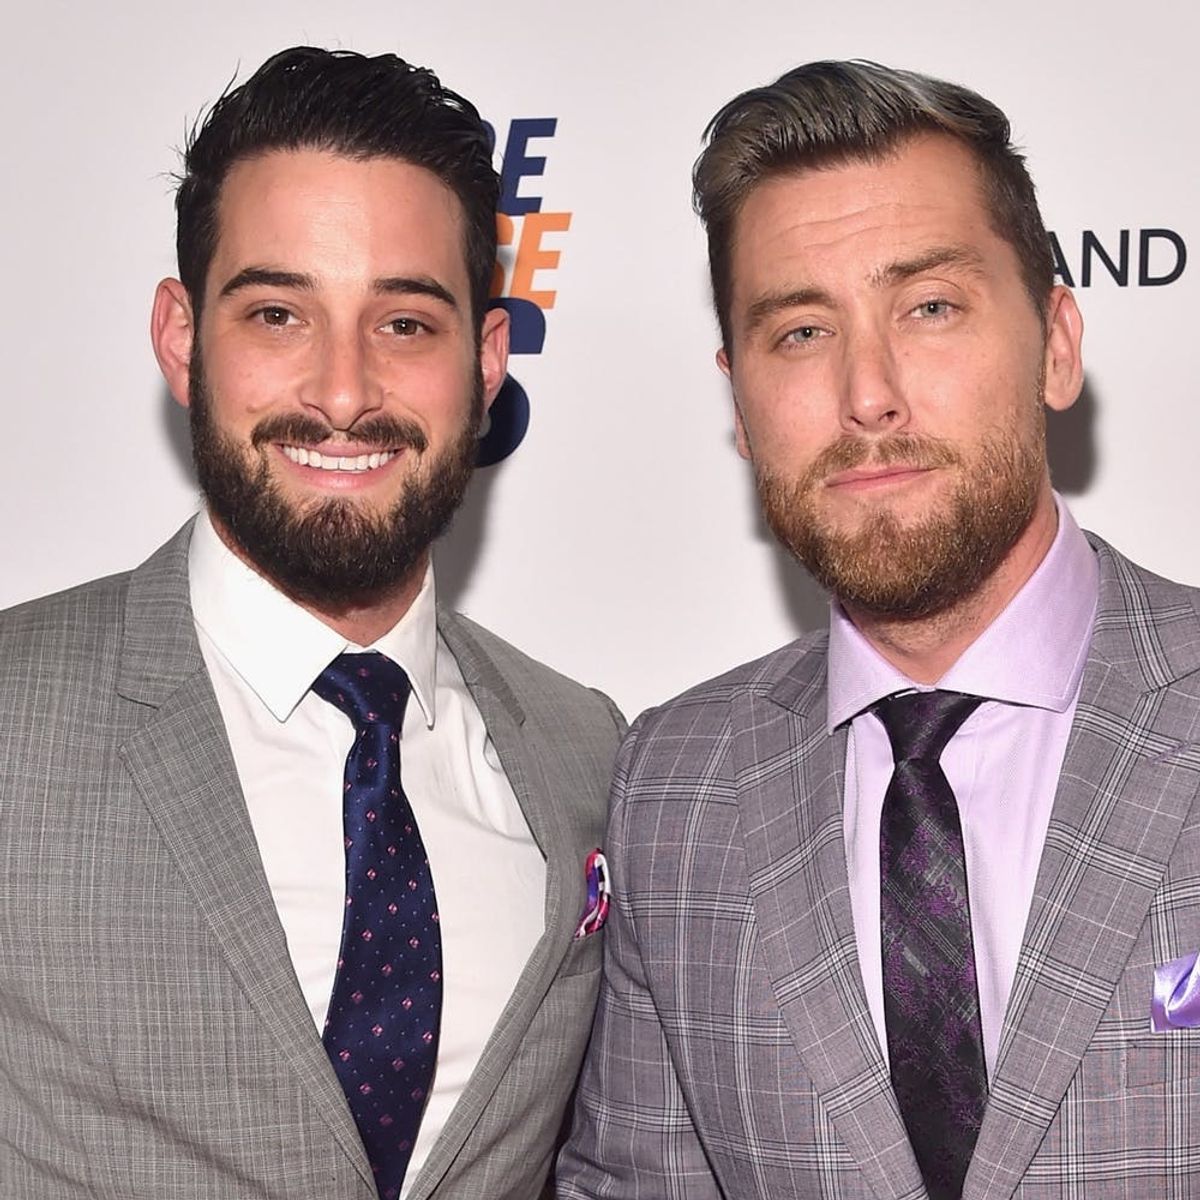 Lance Bass and Husband Michael Turchin Reveal They’ve Begun the Process for Surrogacy